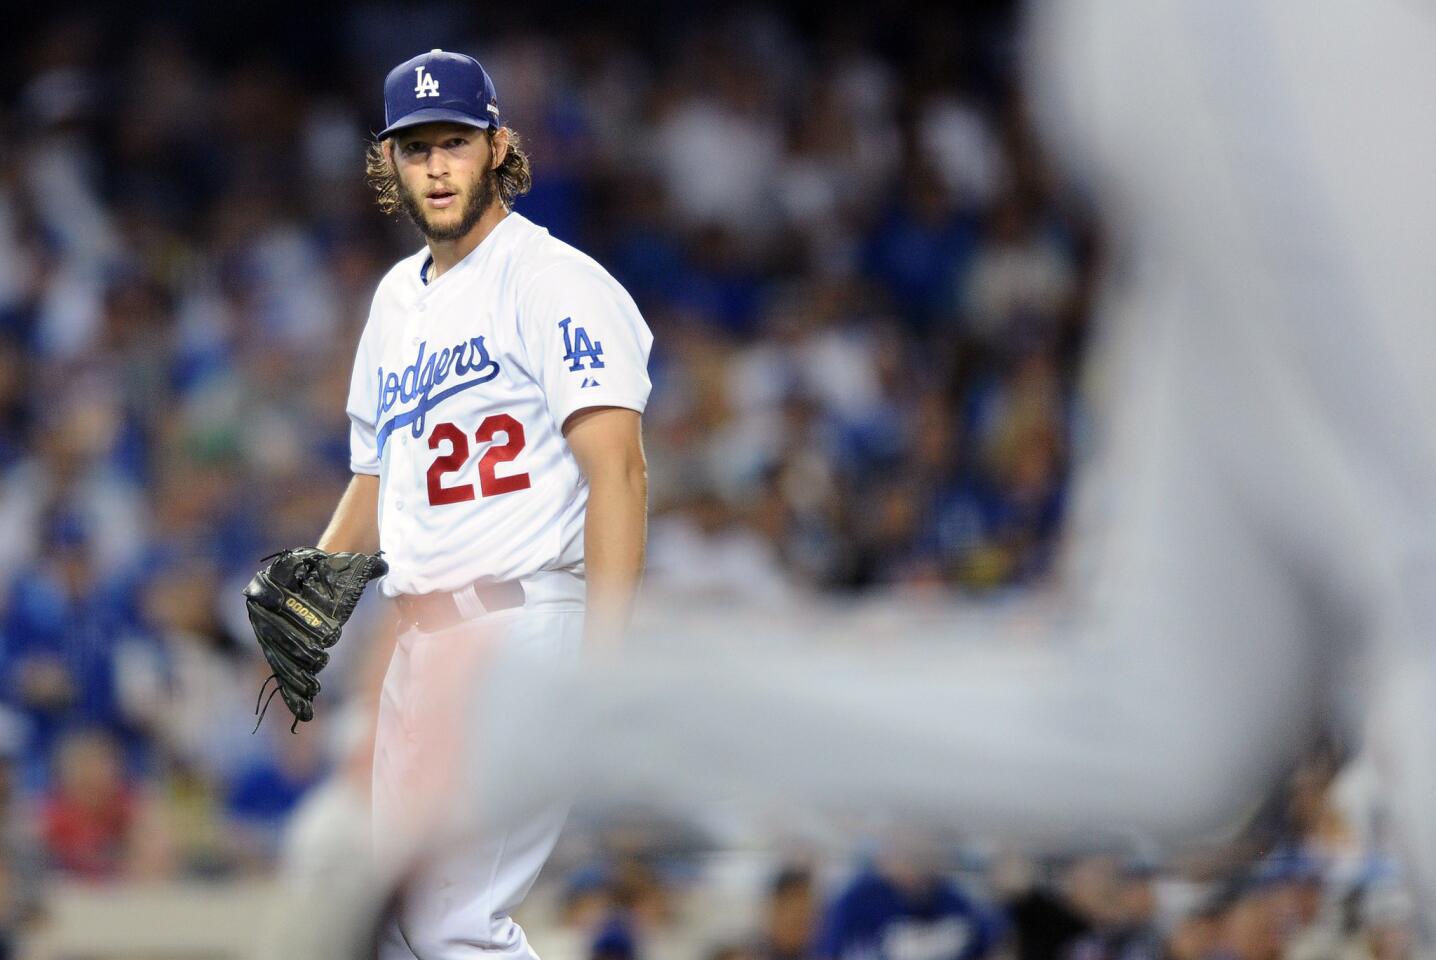 Clayton Kershaw gave up three earned runs on four hits over 6 2/3 innings against the Mets. He struck out 11 batters.